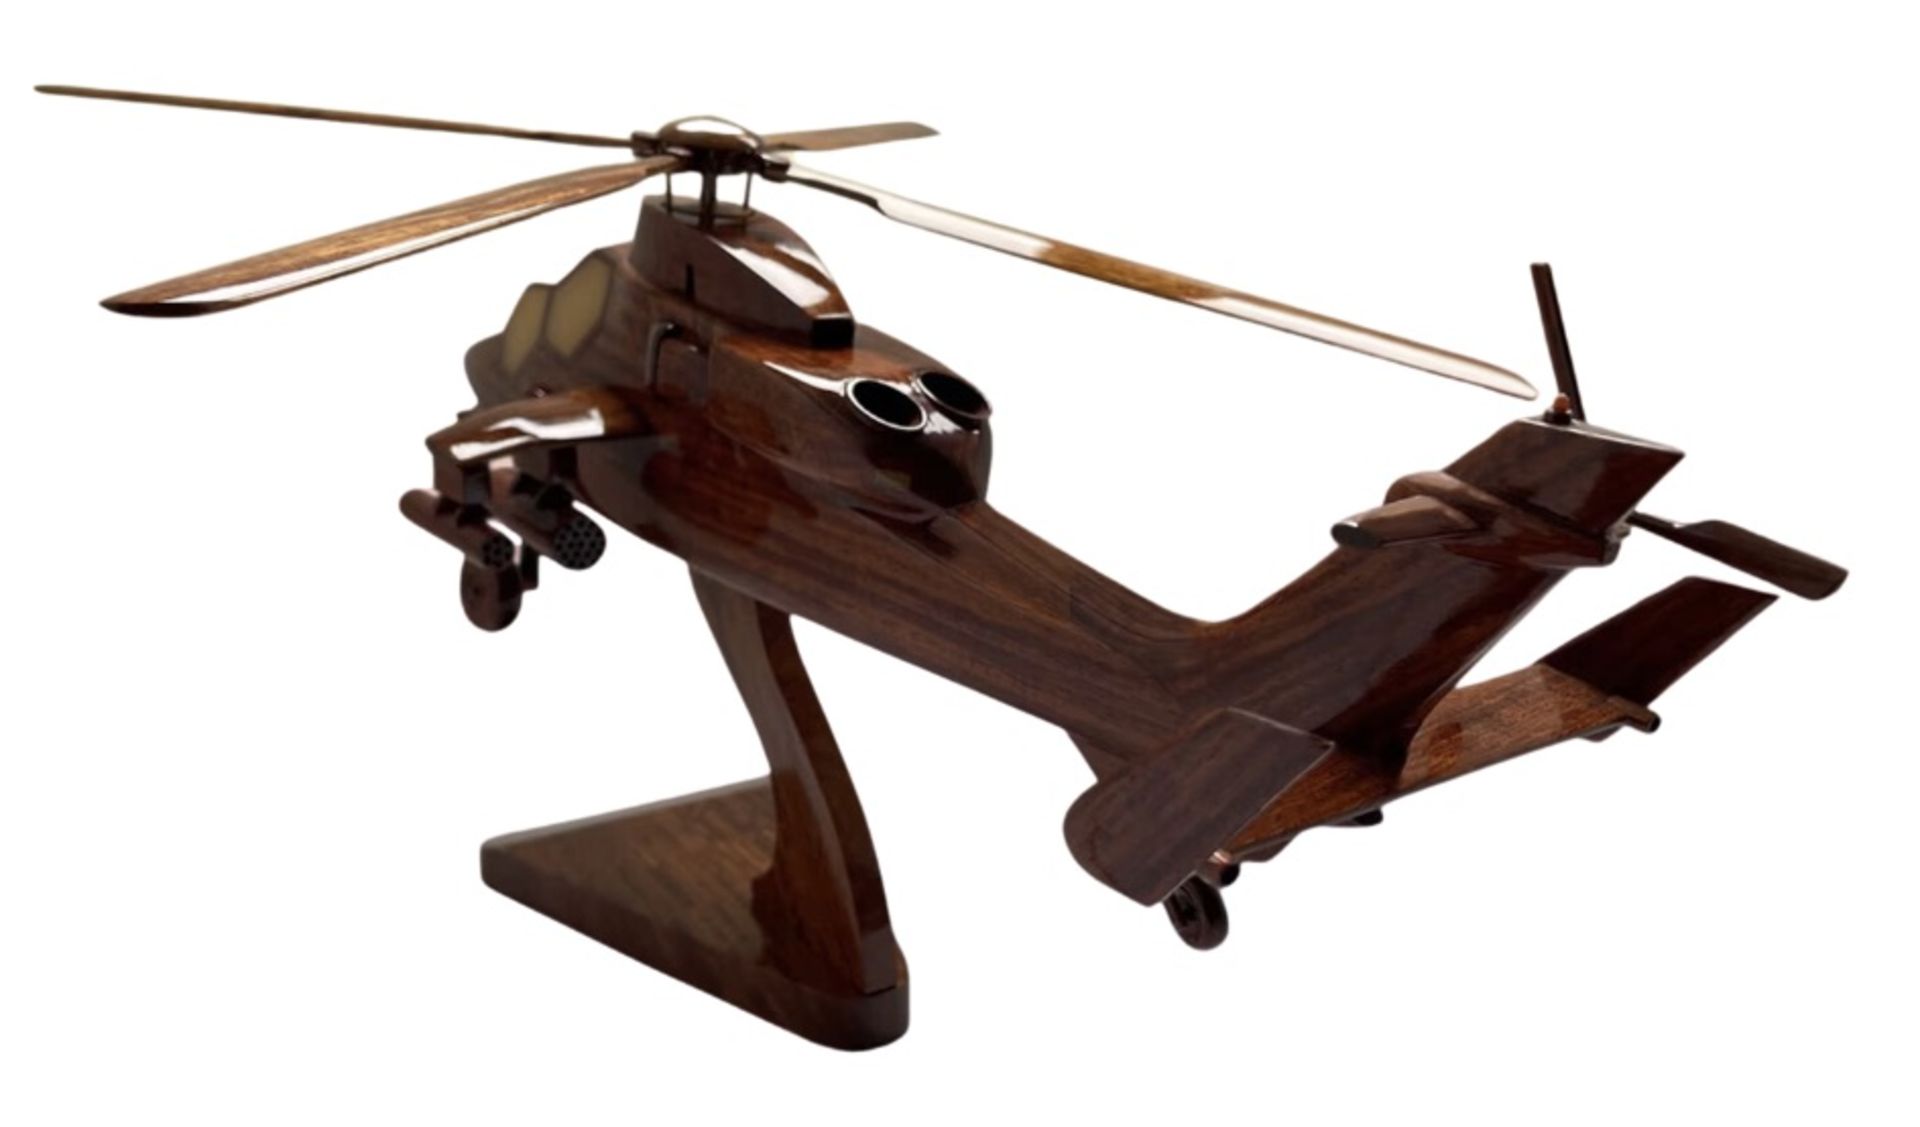 Eurocopter / Airbus Tiger Wooden Scale Desk Display Model - Image 3 of 7